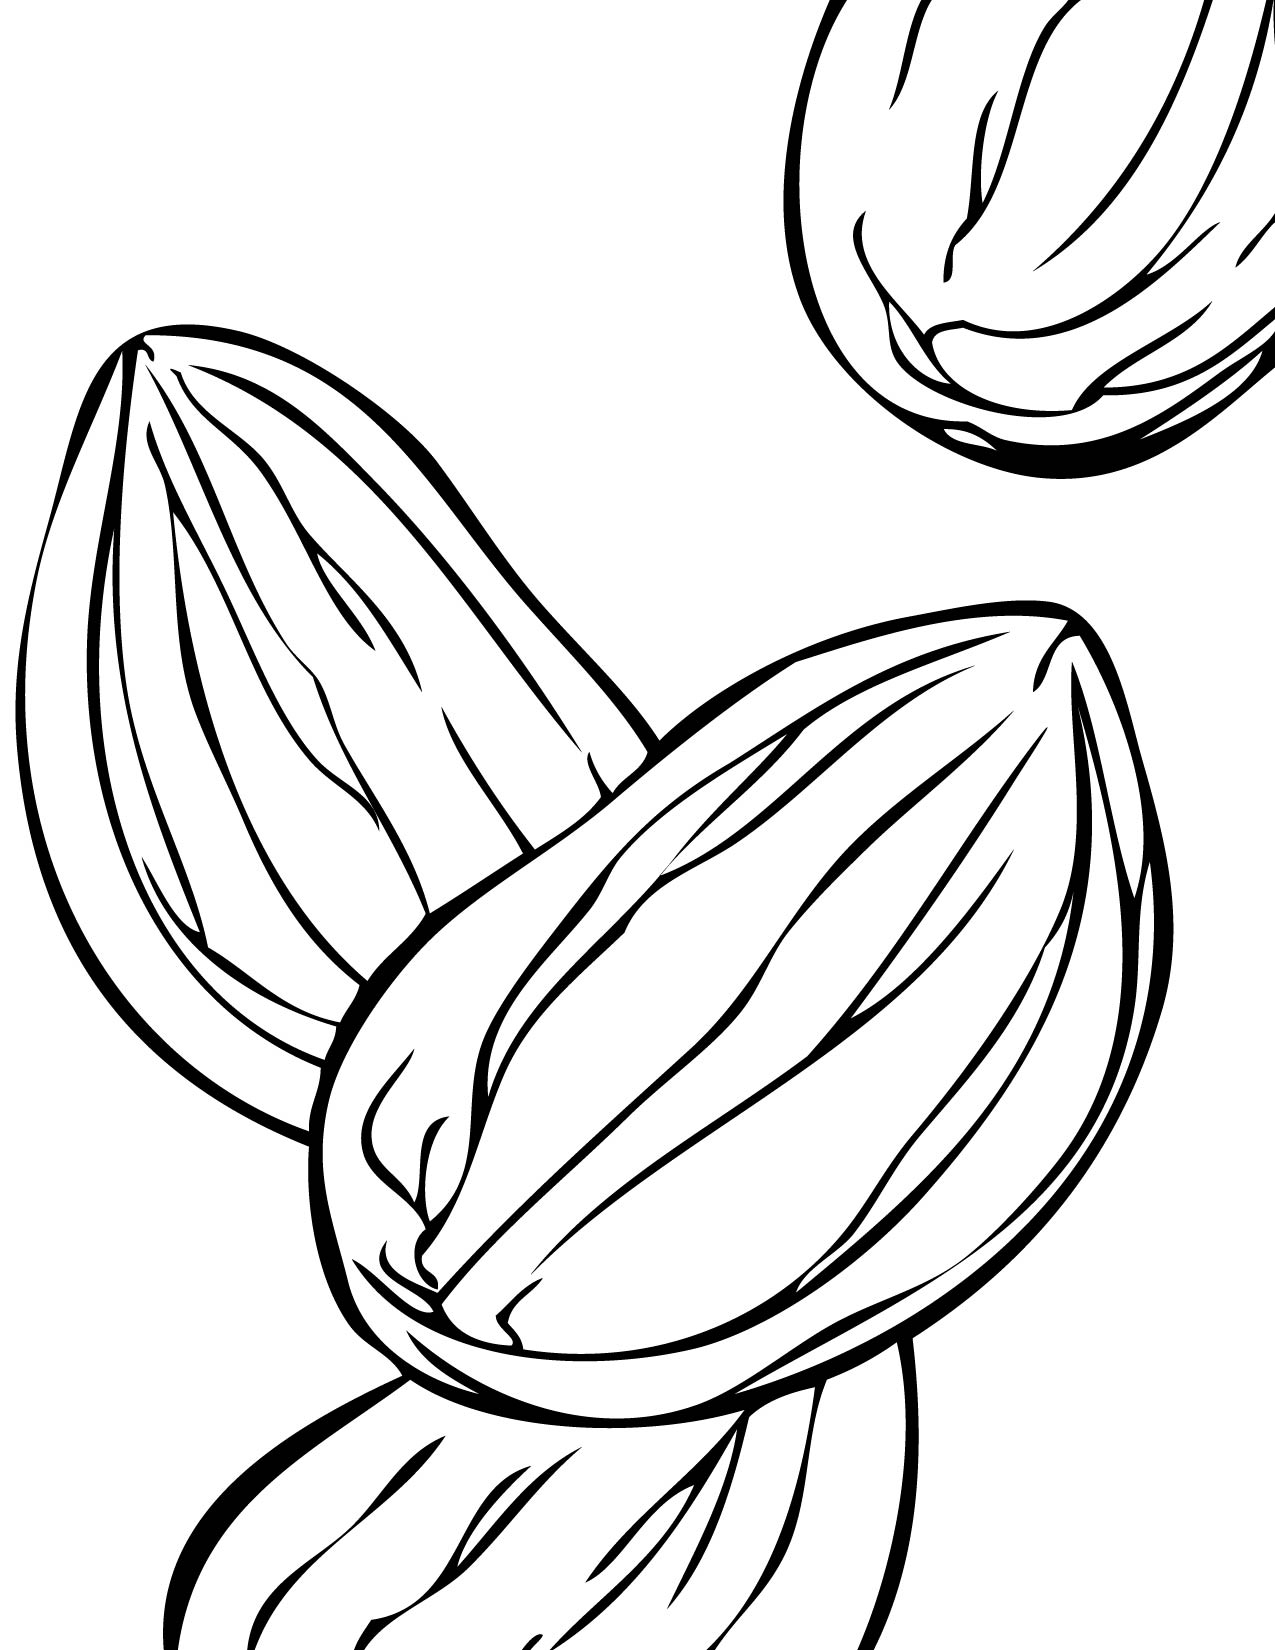 Nut coloring #6, Download drawings